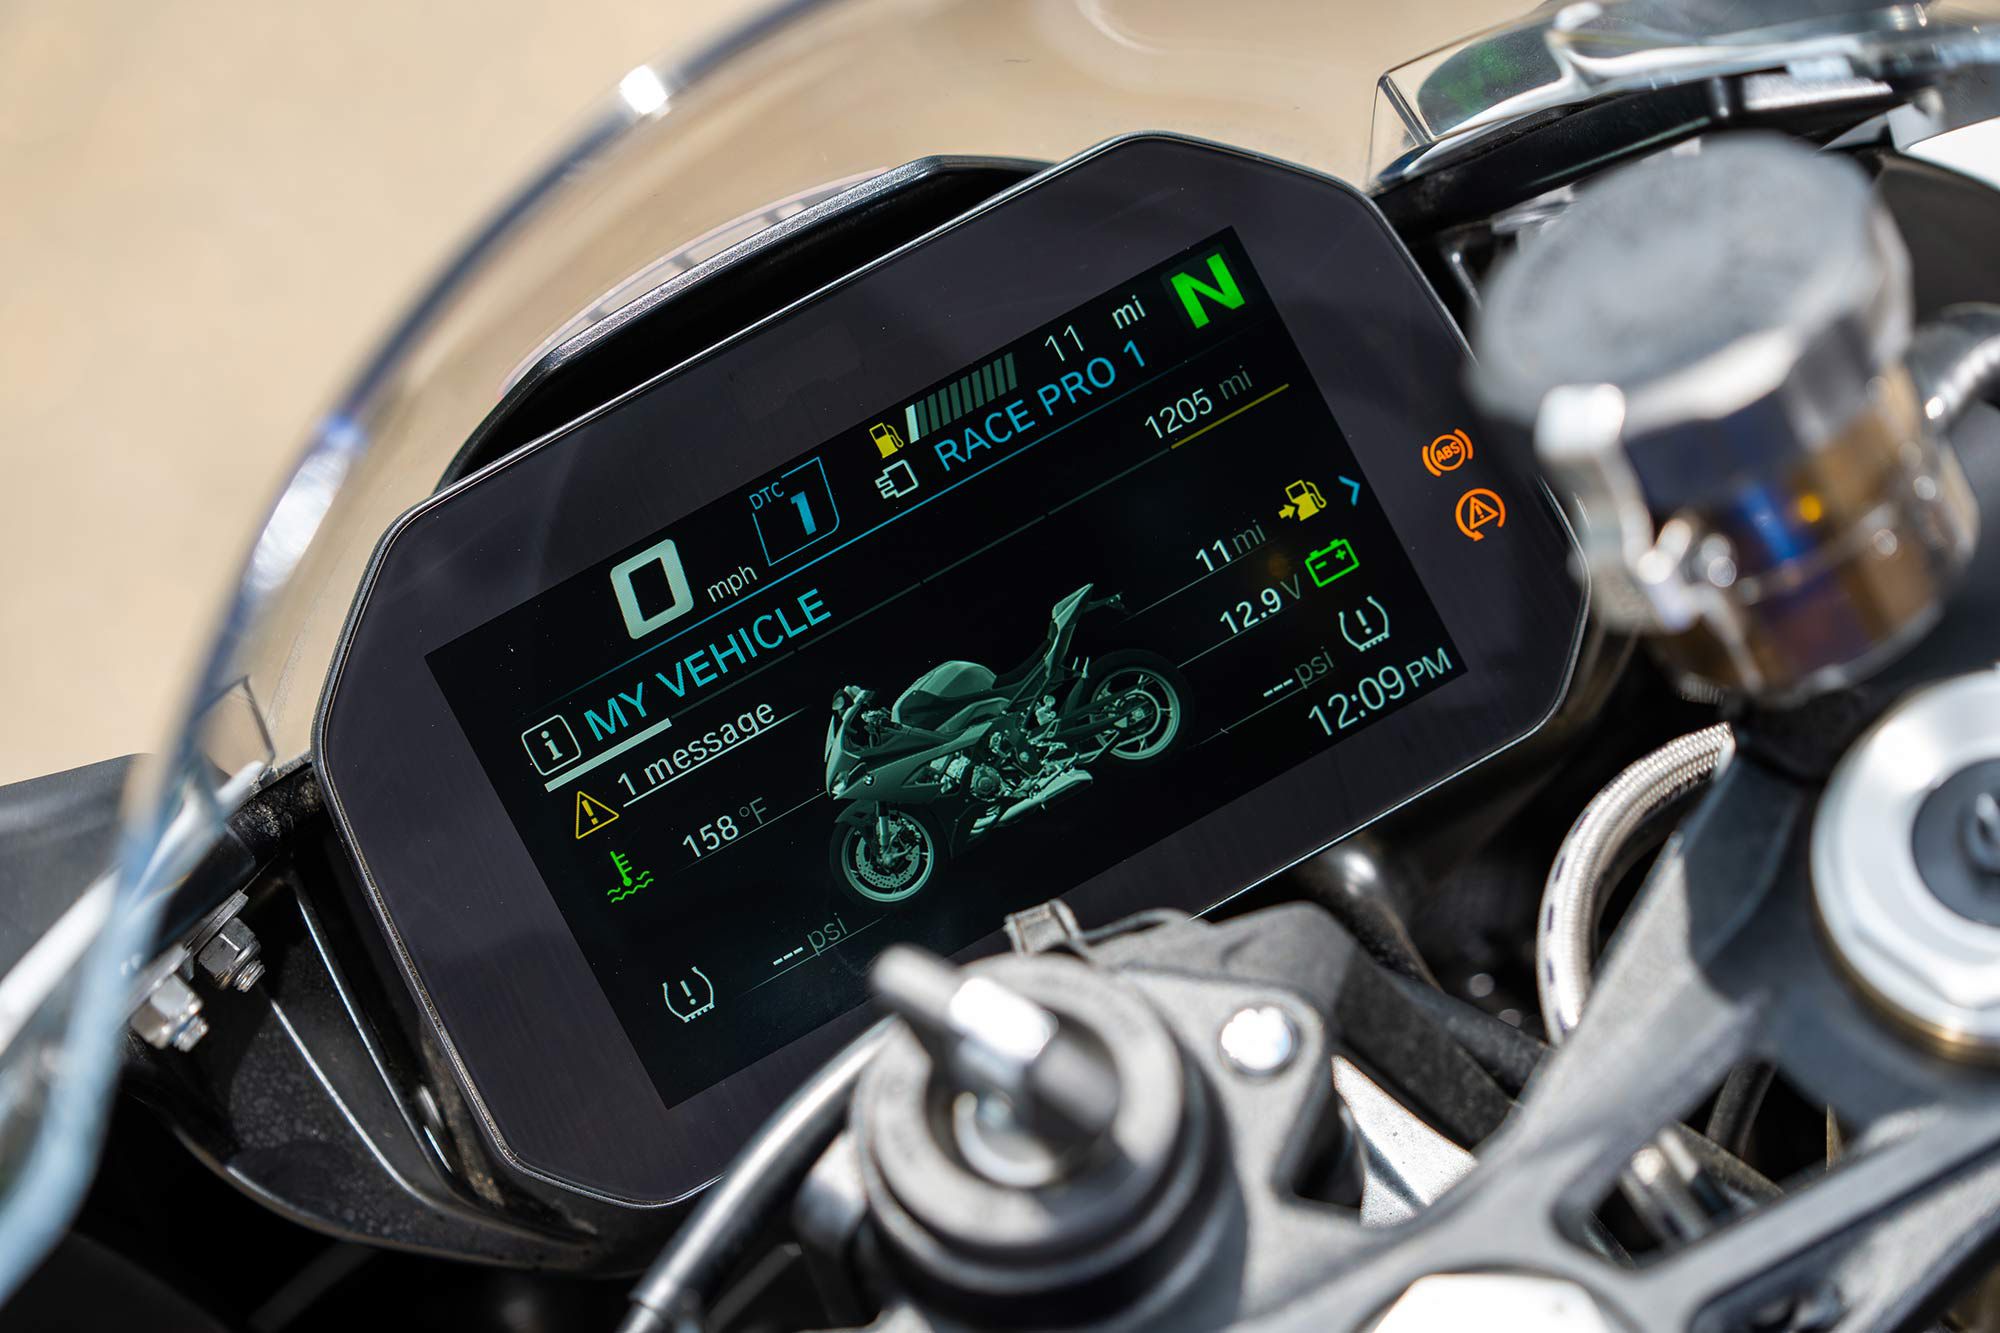 The S 1000 RR sports an attractive and functional 6.5-inch color TFT display. The screen is easily paired with iOS-enabled devices with the BMW Motorrad Connected app.